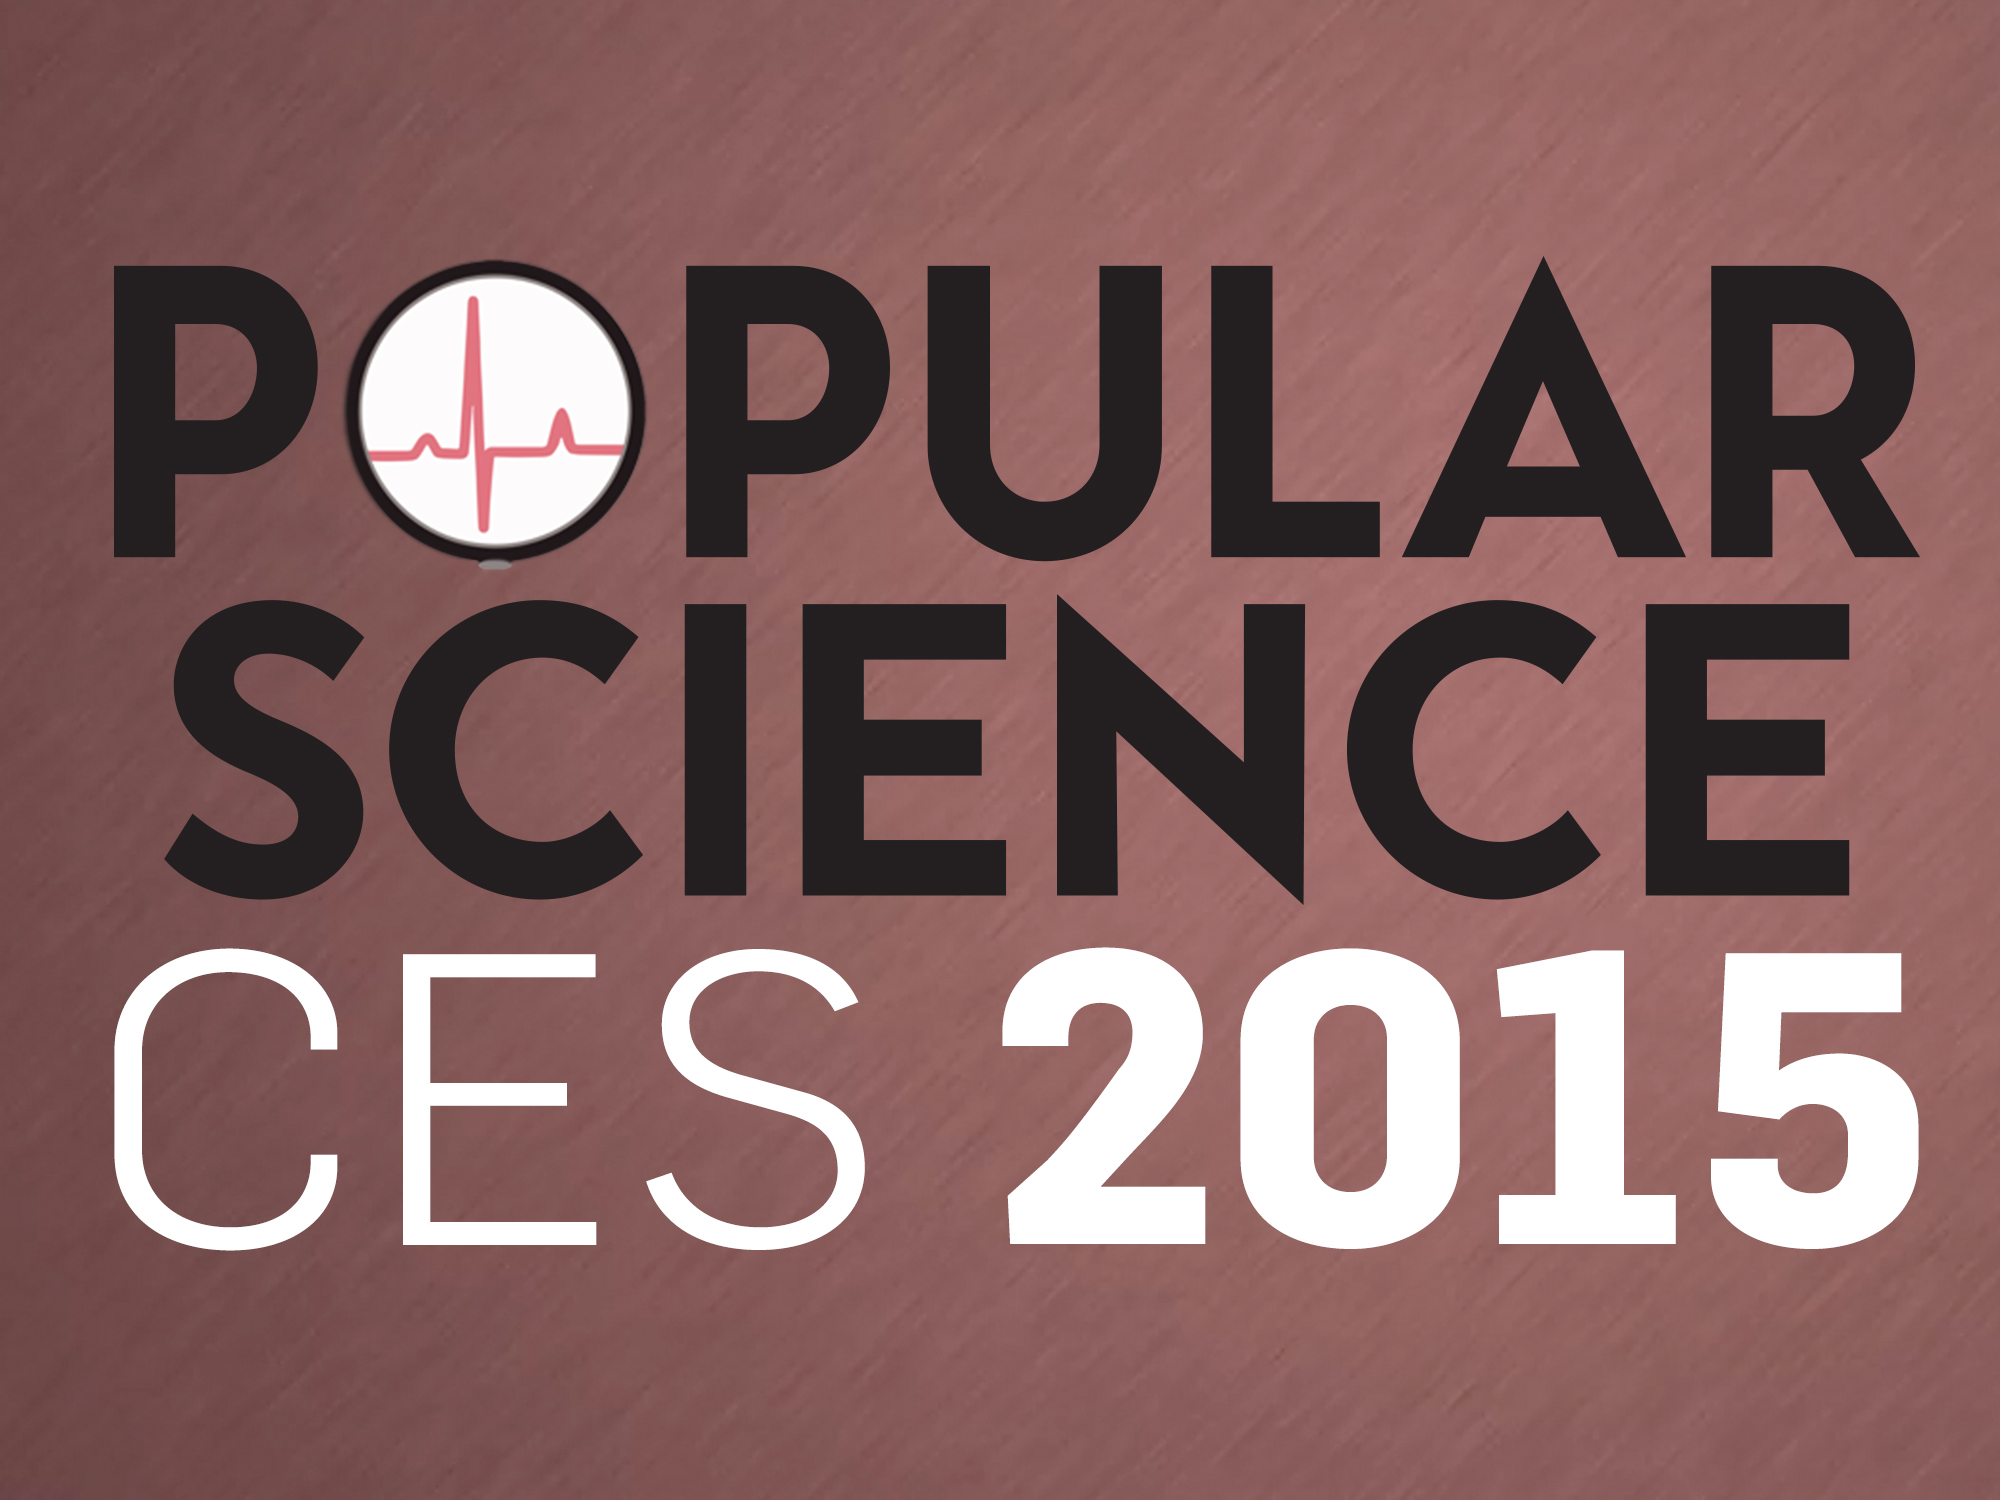 Popular Science consumer electronics show 2015 coverage logo